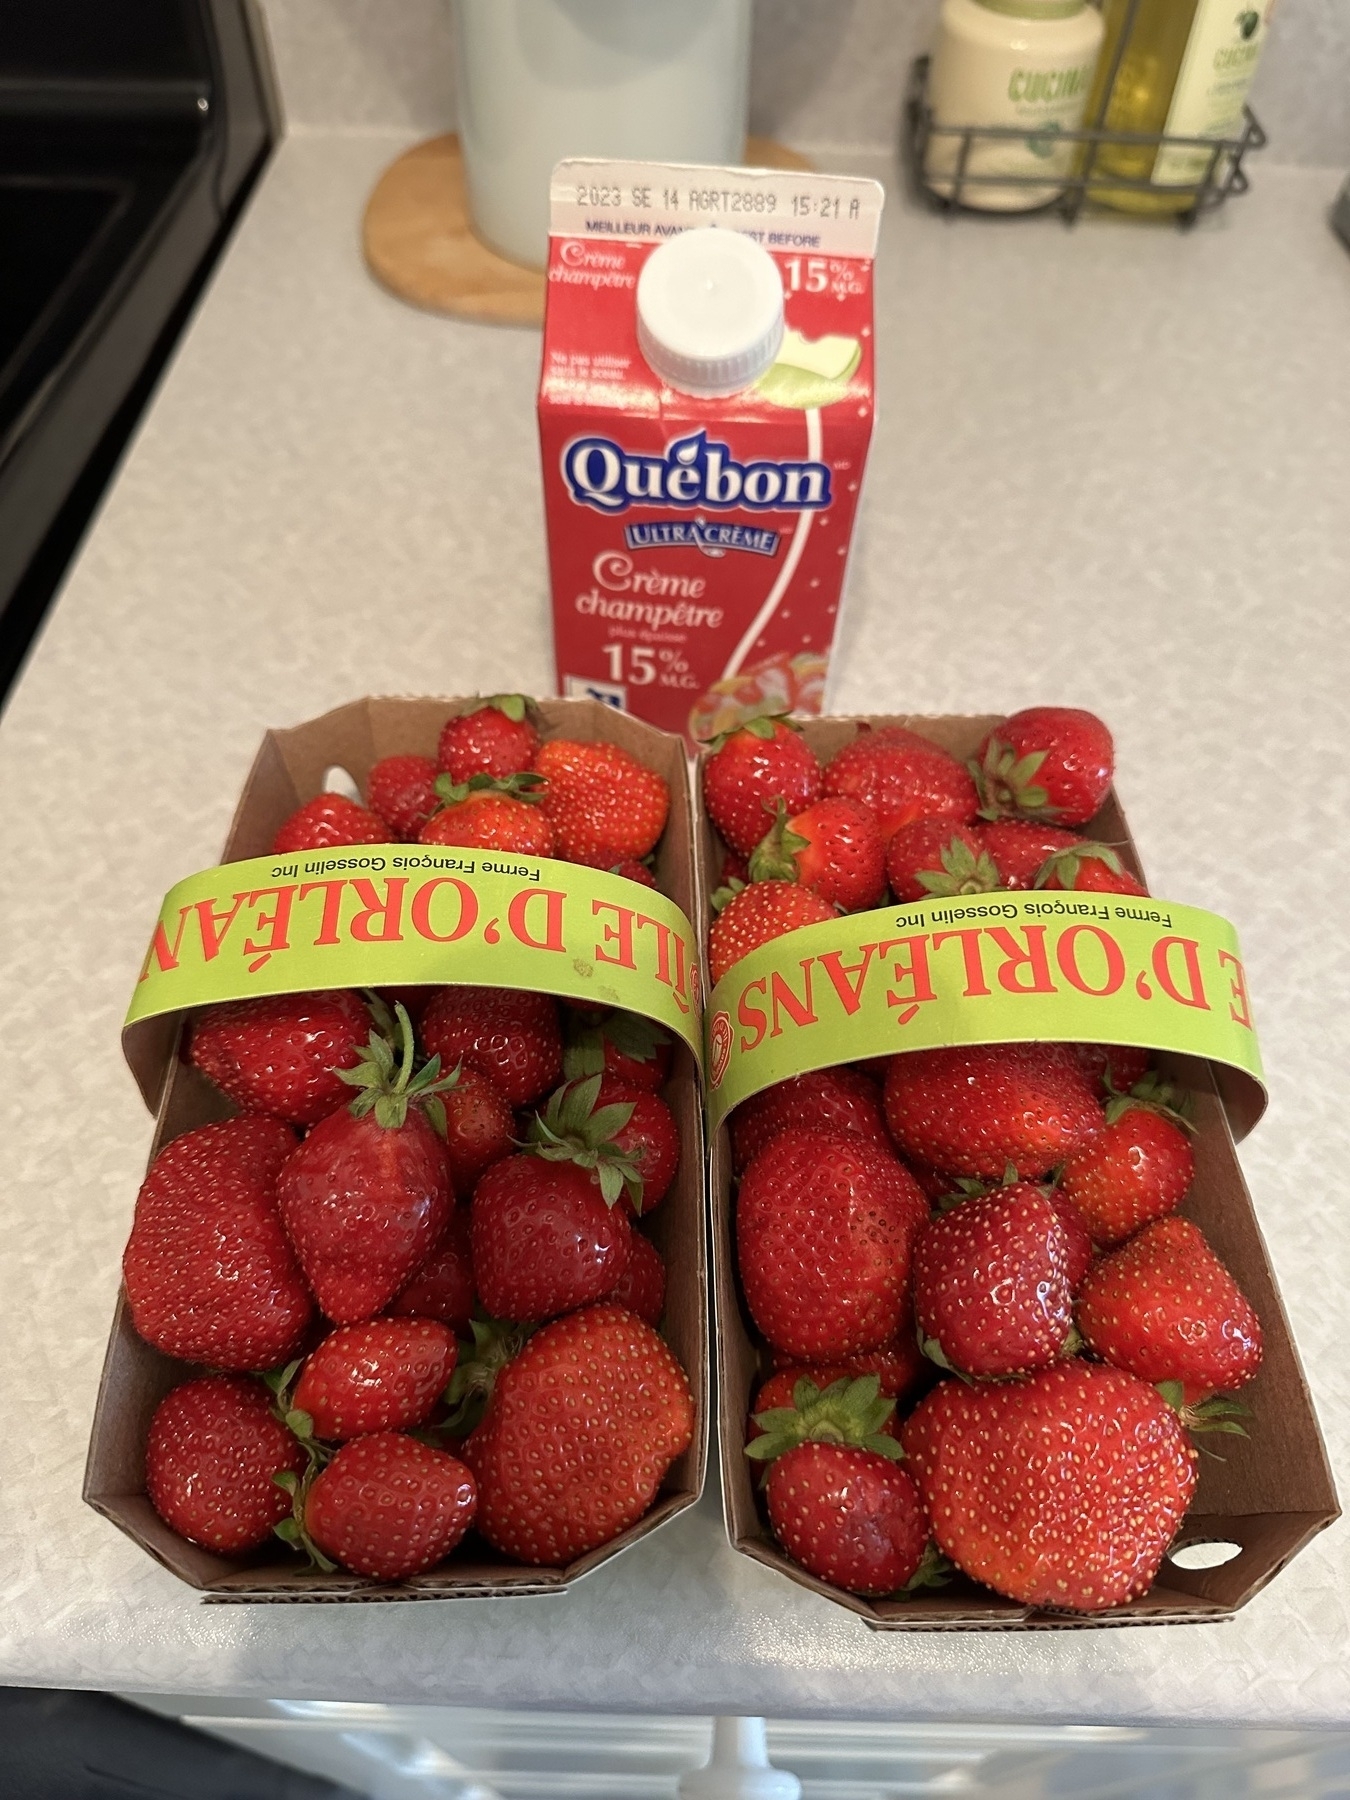 2 baskets of fresh picked local strawberries, Quebec City